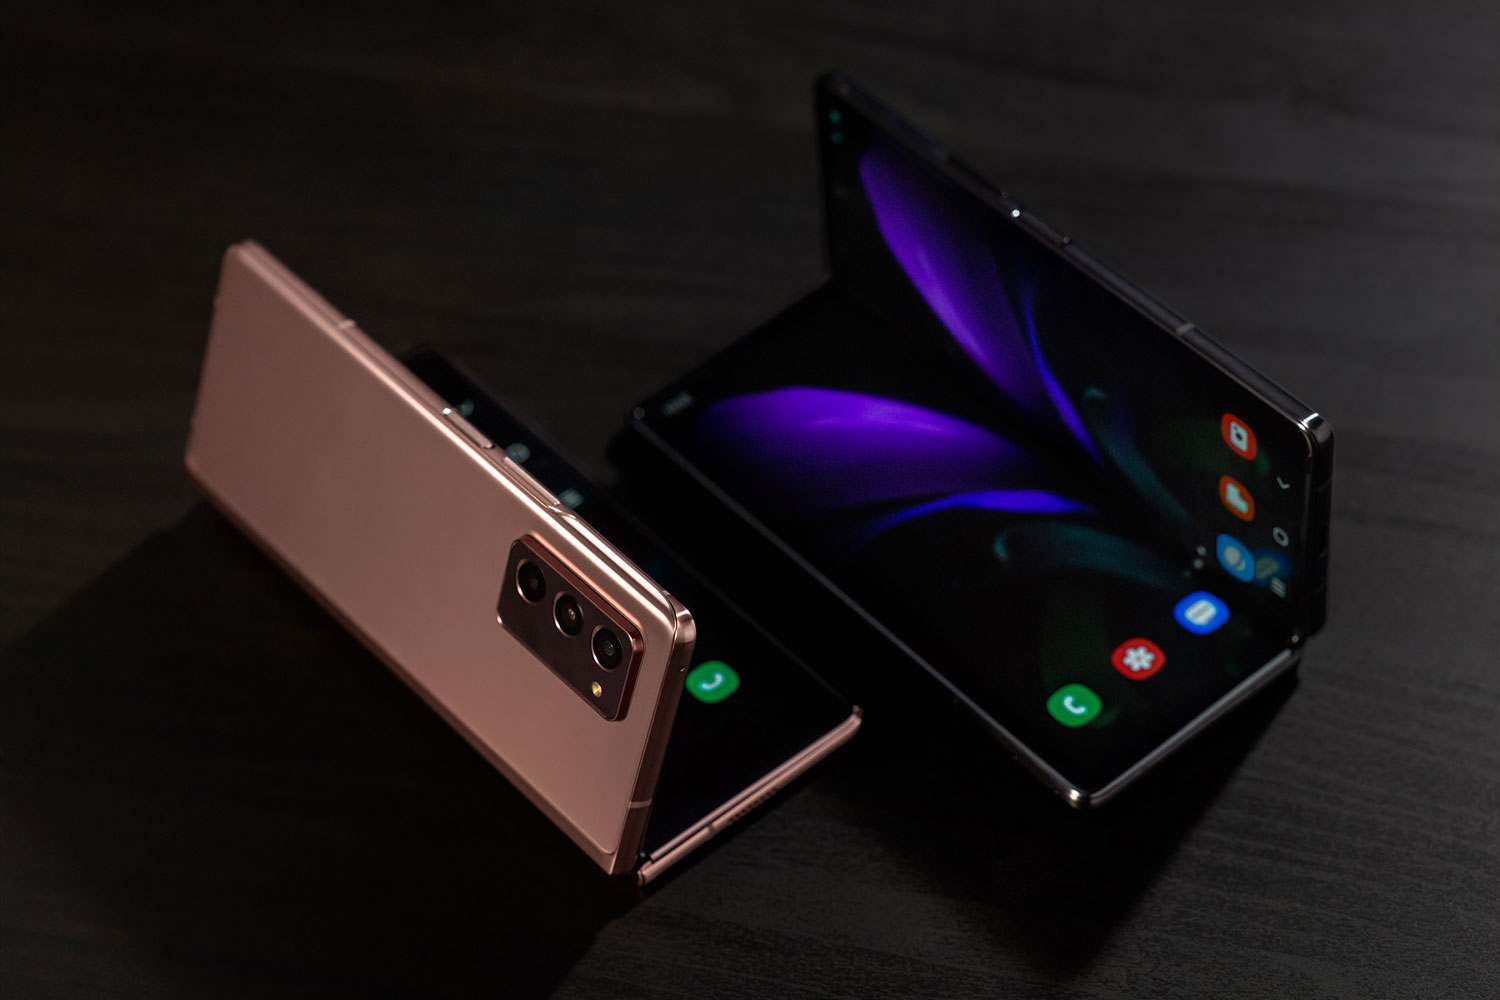 Samsung Galaxy Z Fold2 Retails at RM7,999, Pre-Order on 11 September